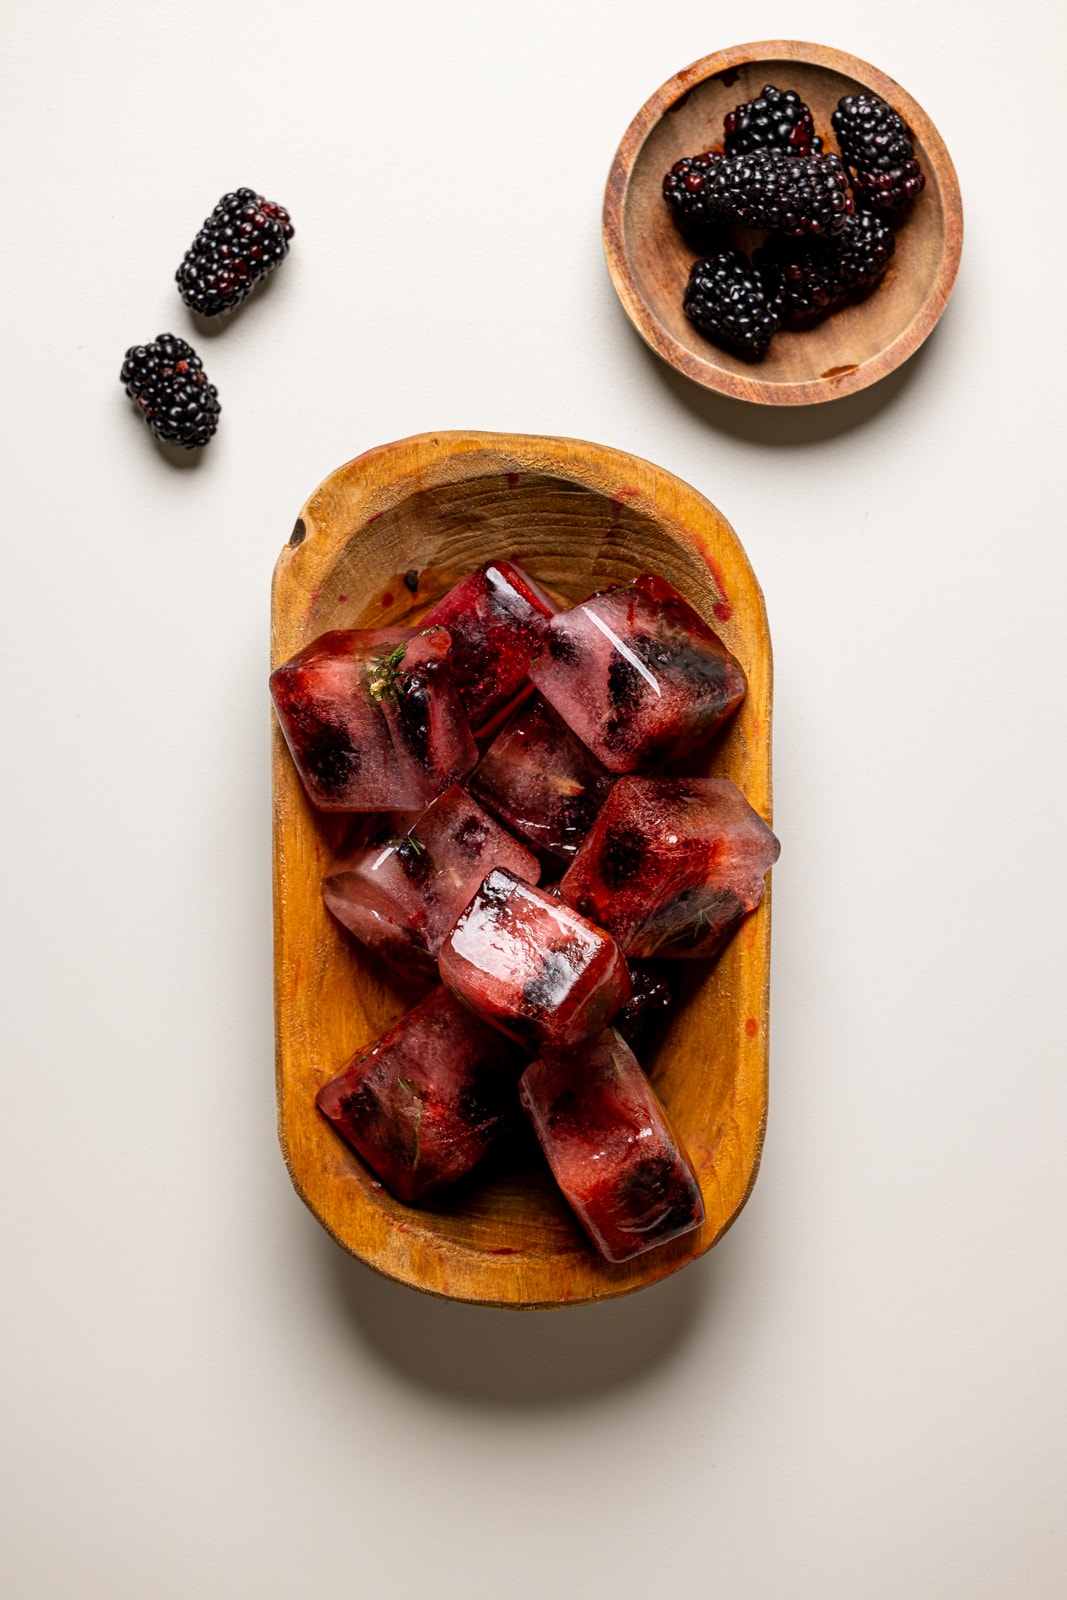 Ice cubes with blackberries in a brown wood bowl on a light grey table.